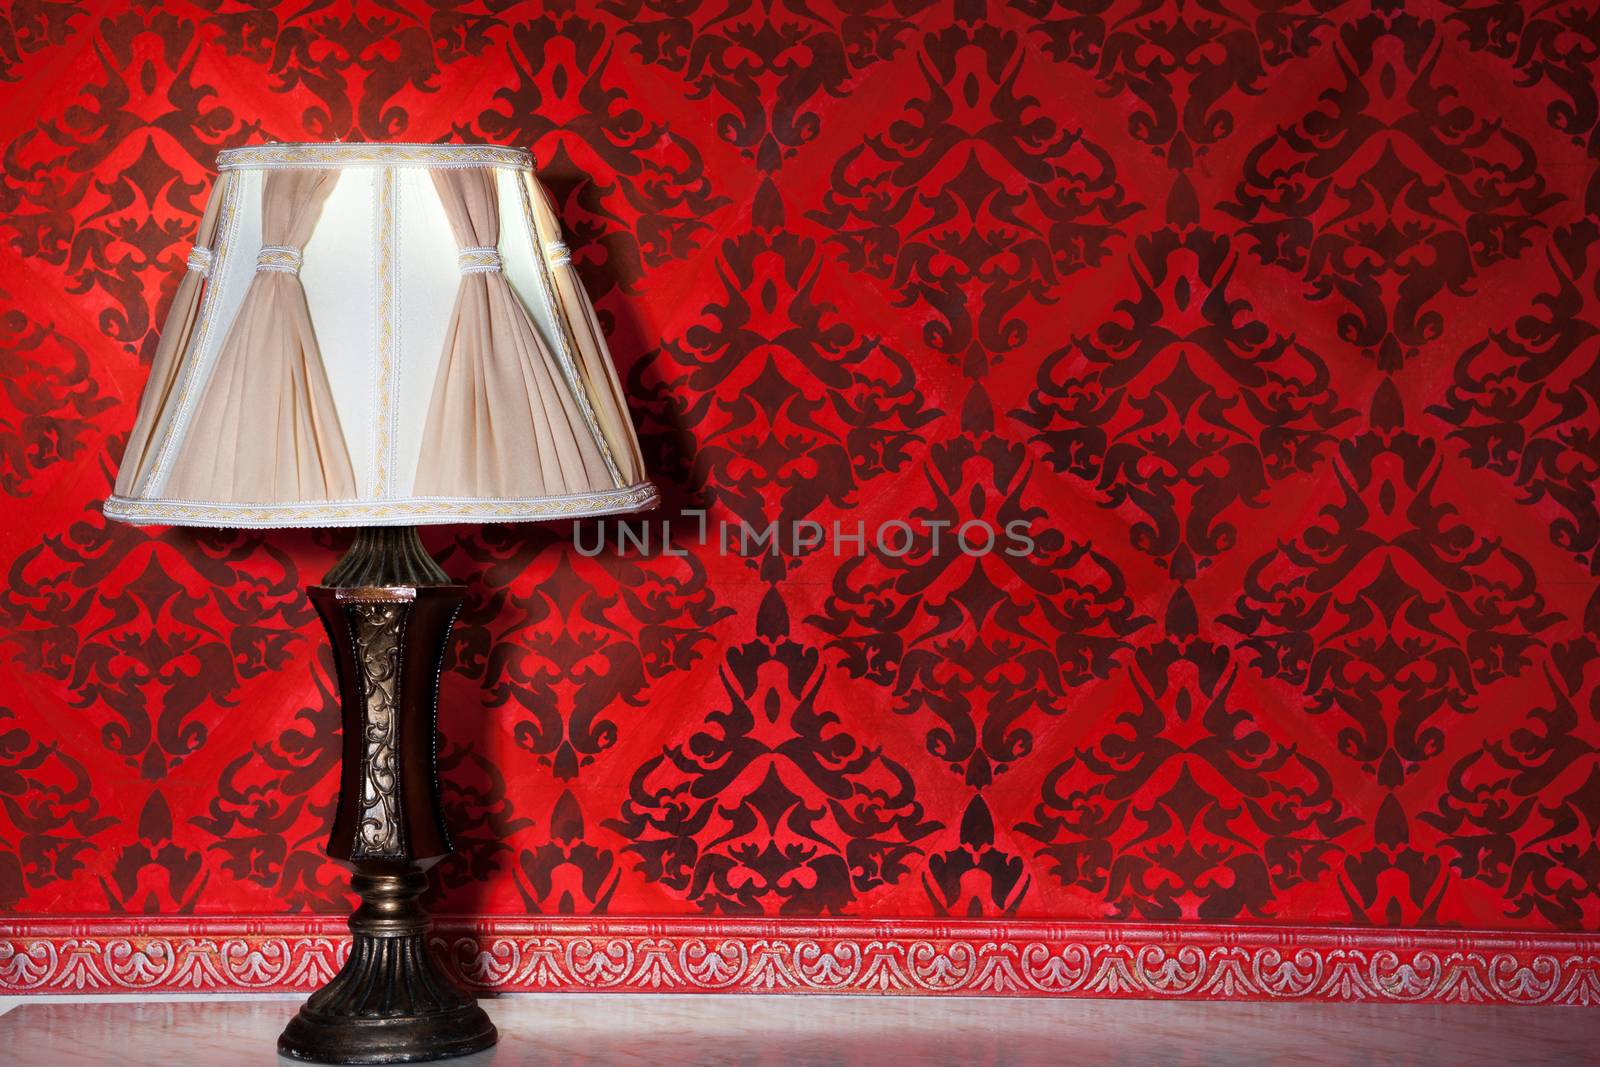 Vintage lamp in old interior from rococo period studio shooting